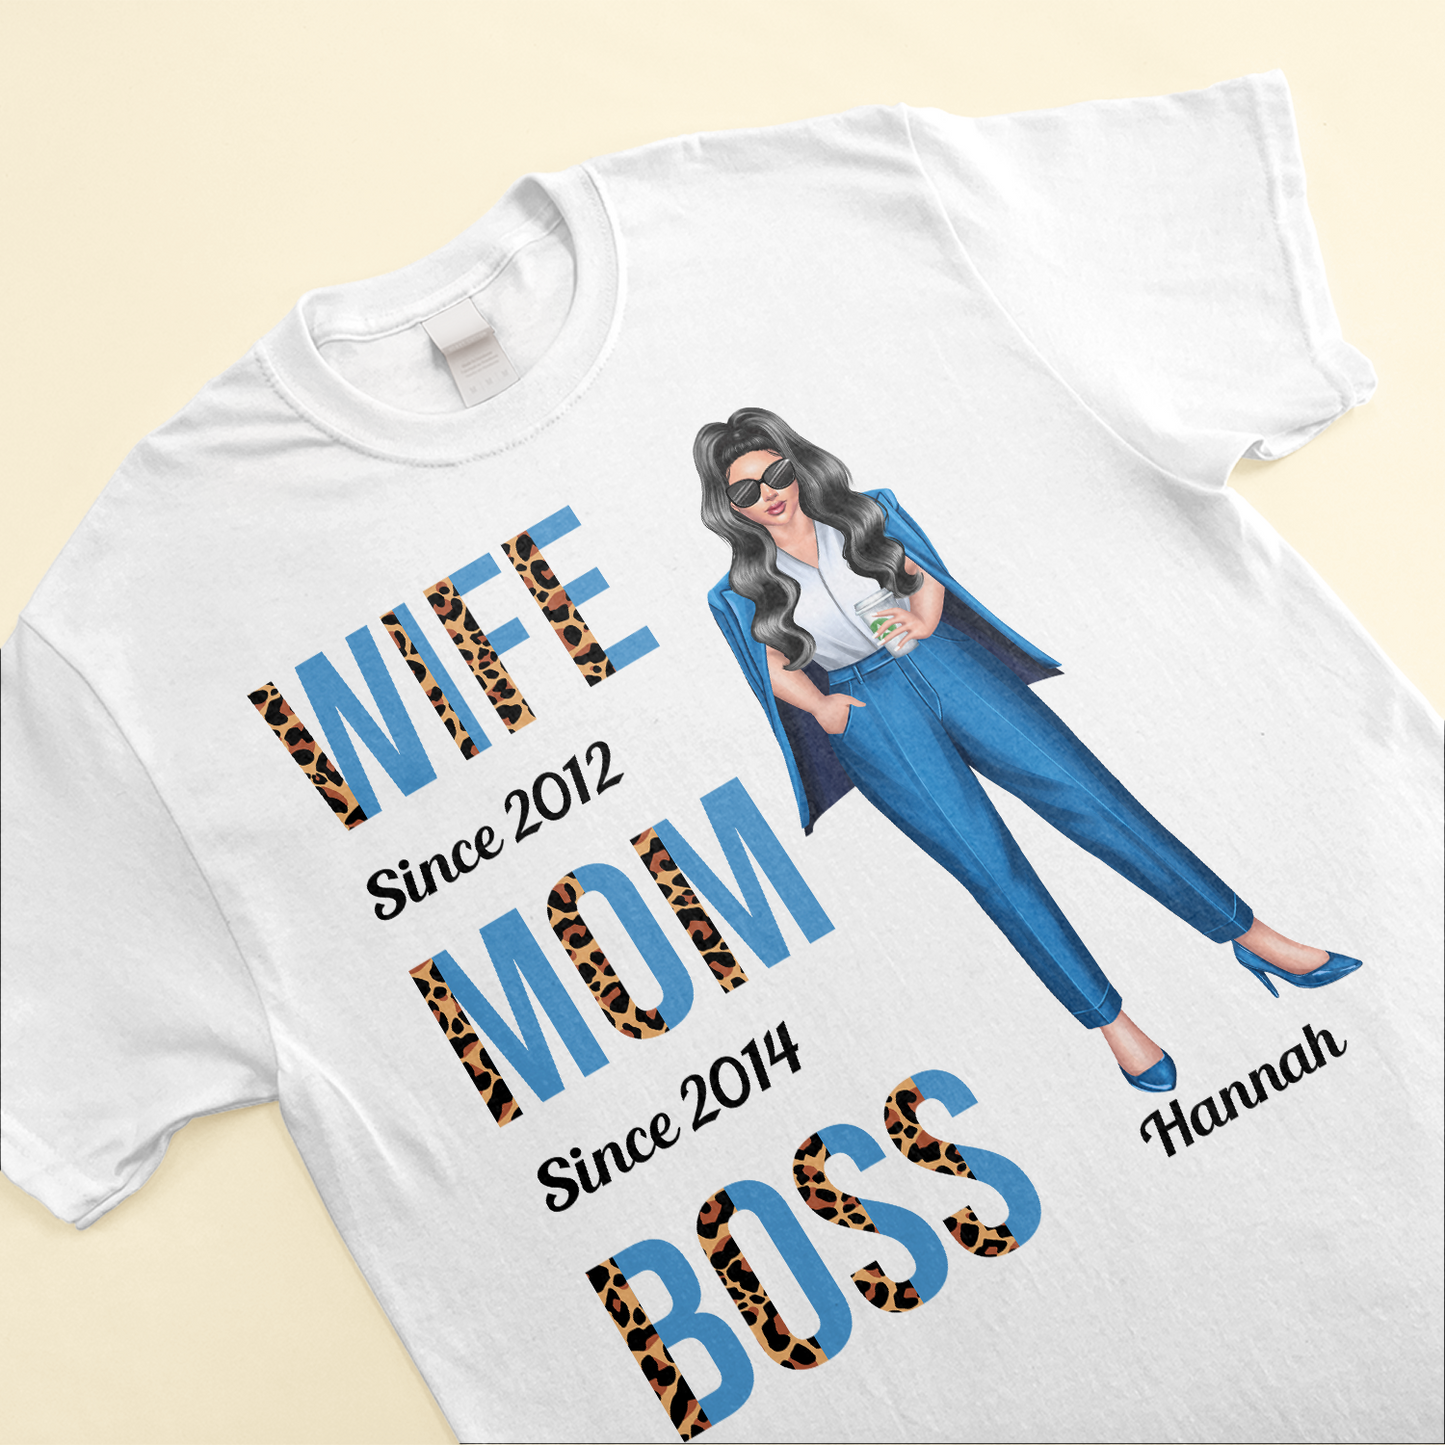 Wife, Mom, Boss - Personalized Shirt - Anniversary Gift Valentine's Day Gift For Wife, Boss Lady